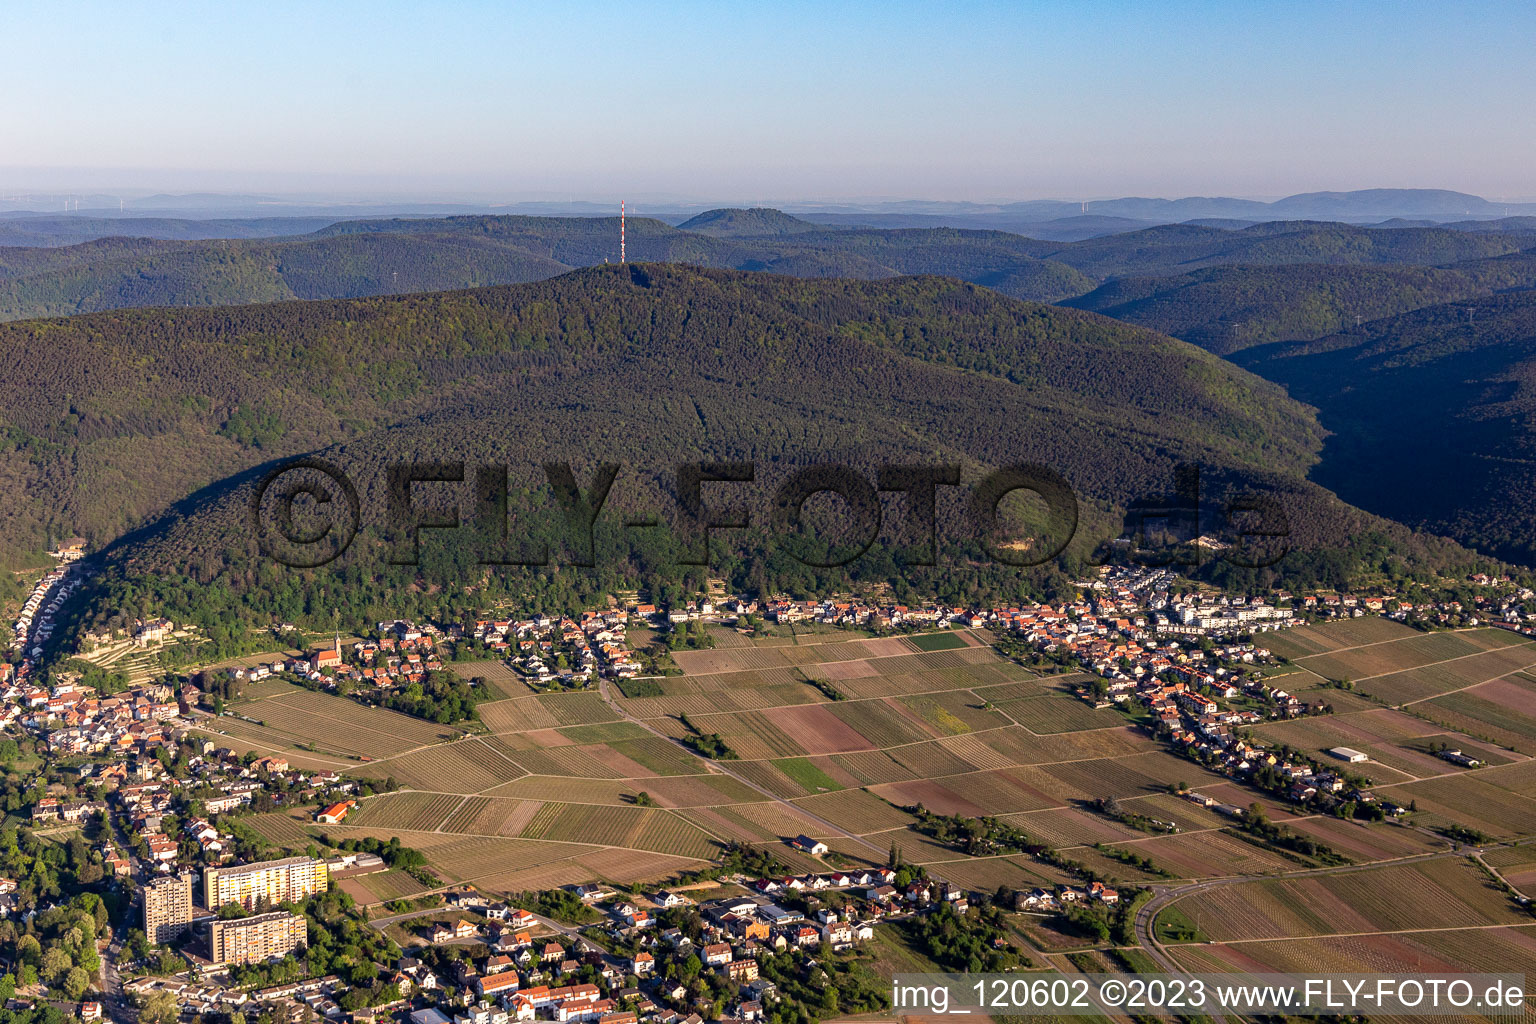 Aerial view of At the foot of the Weinbiet in the district Haardt in Neustadt an der Weinstraße in the state Rhineland-Palatinate, Germany